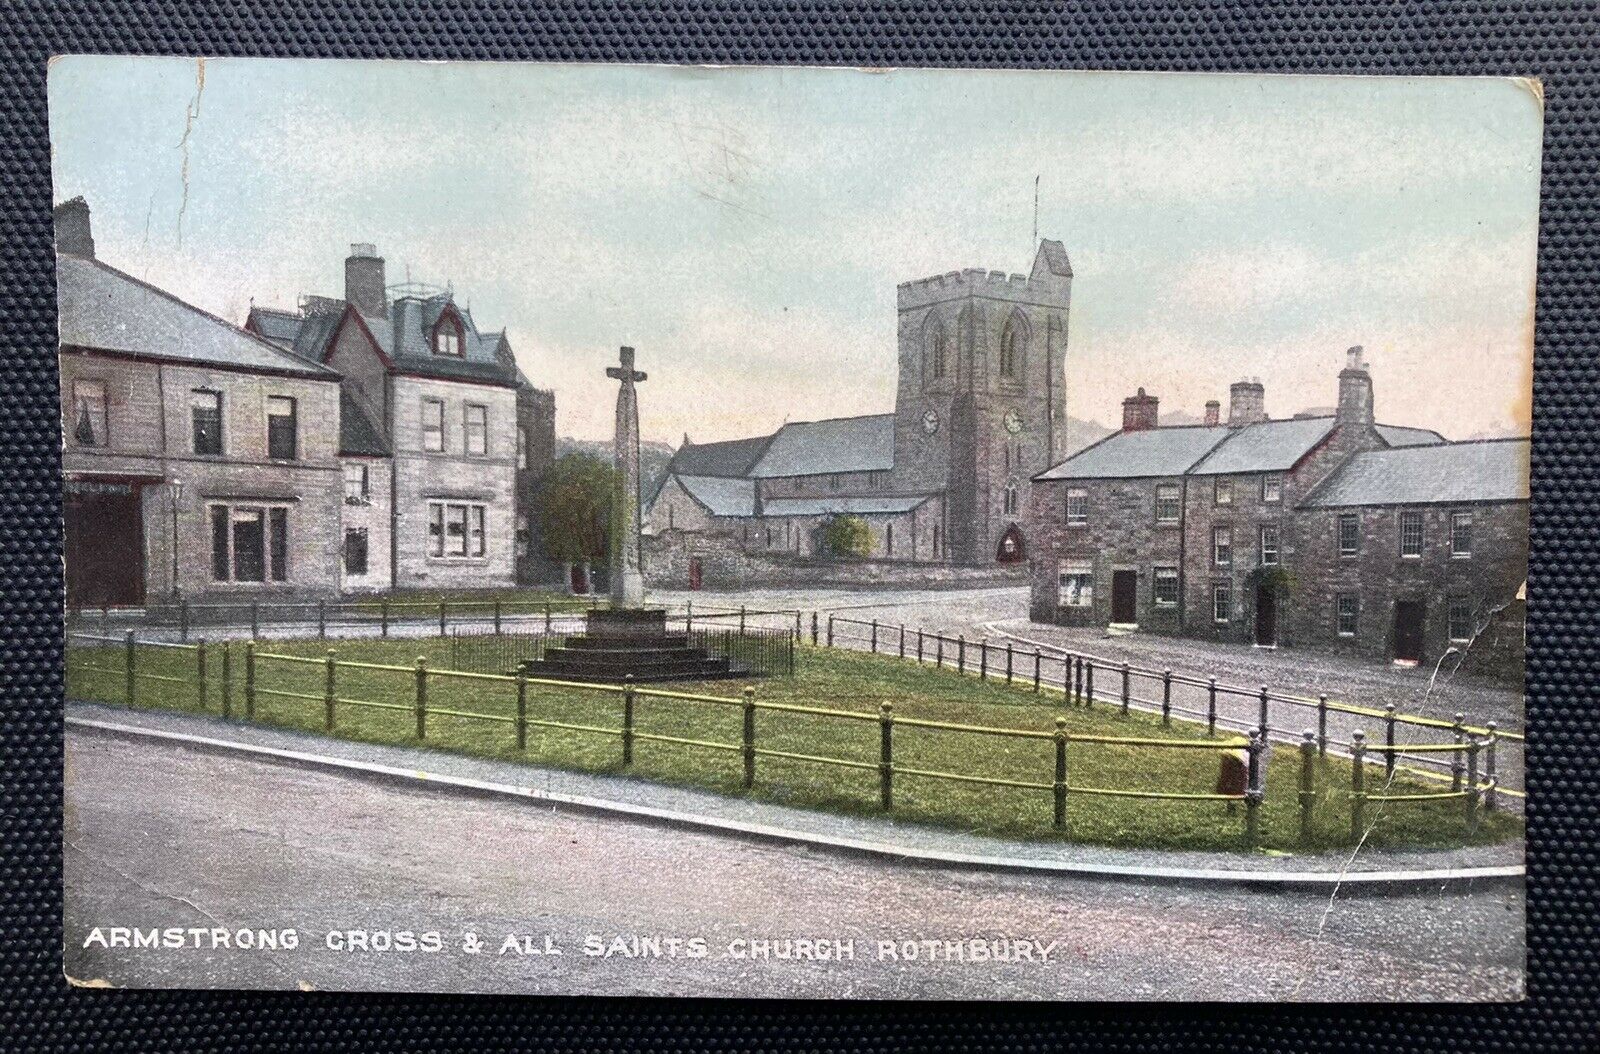 House Clearance - Armstrong Cross - All Saints - Rothbury - Northumberland - A 1908 Service